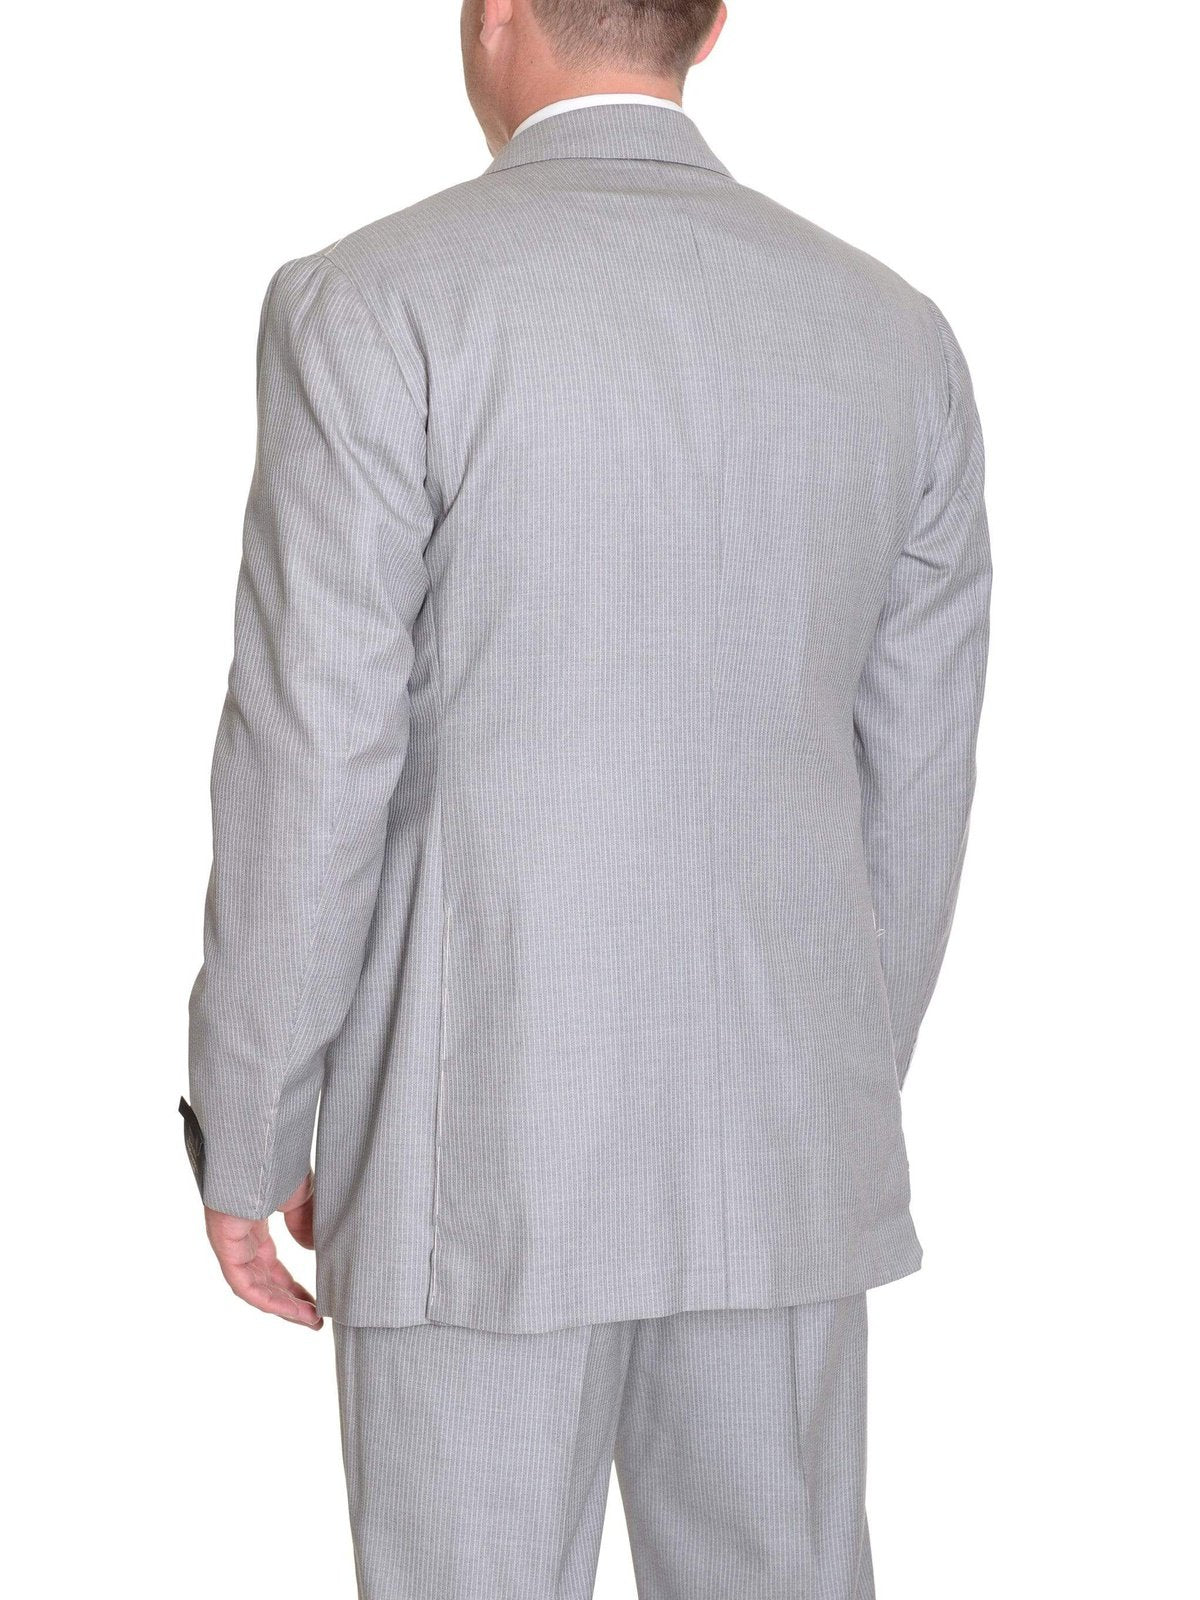 Sartoria Partenopea 40R 50 Light Gray Pinstriped Wool Silk Suit With Peak Lapels - The Suit Depot